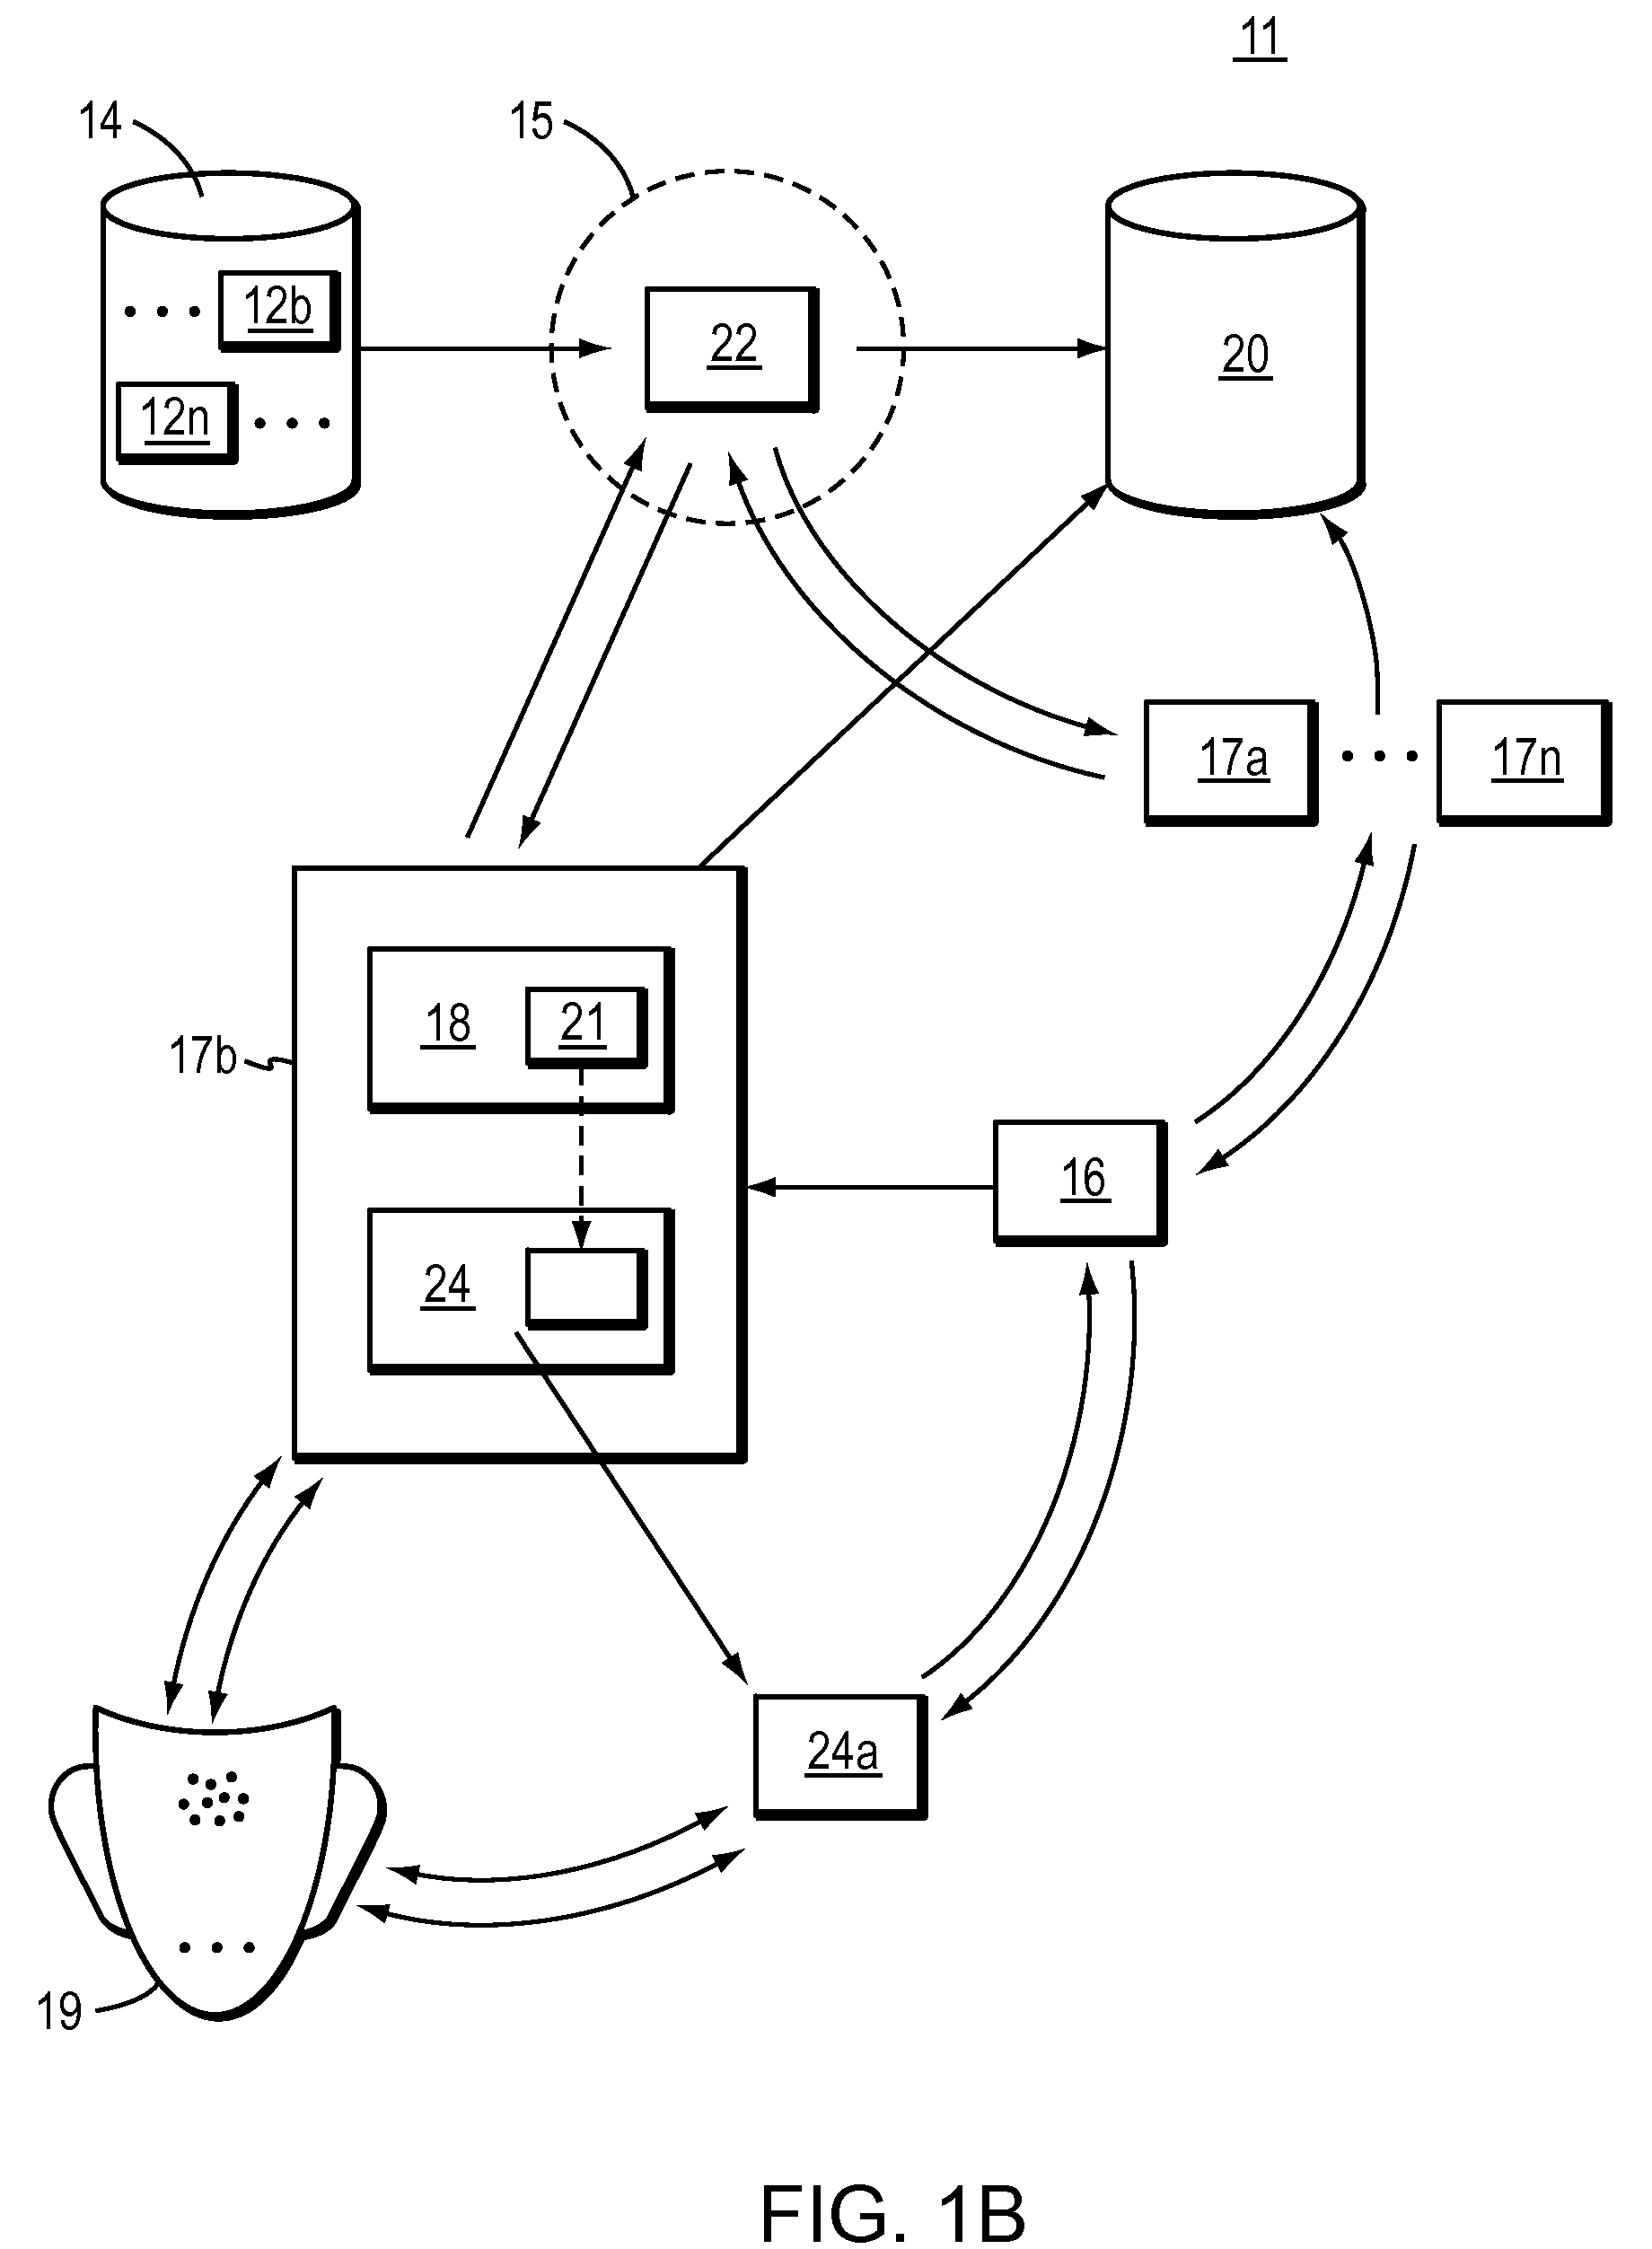 Method and apparatus for displaying interactions with media by members of a social software system